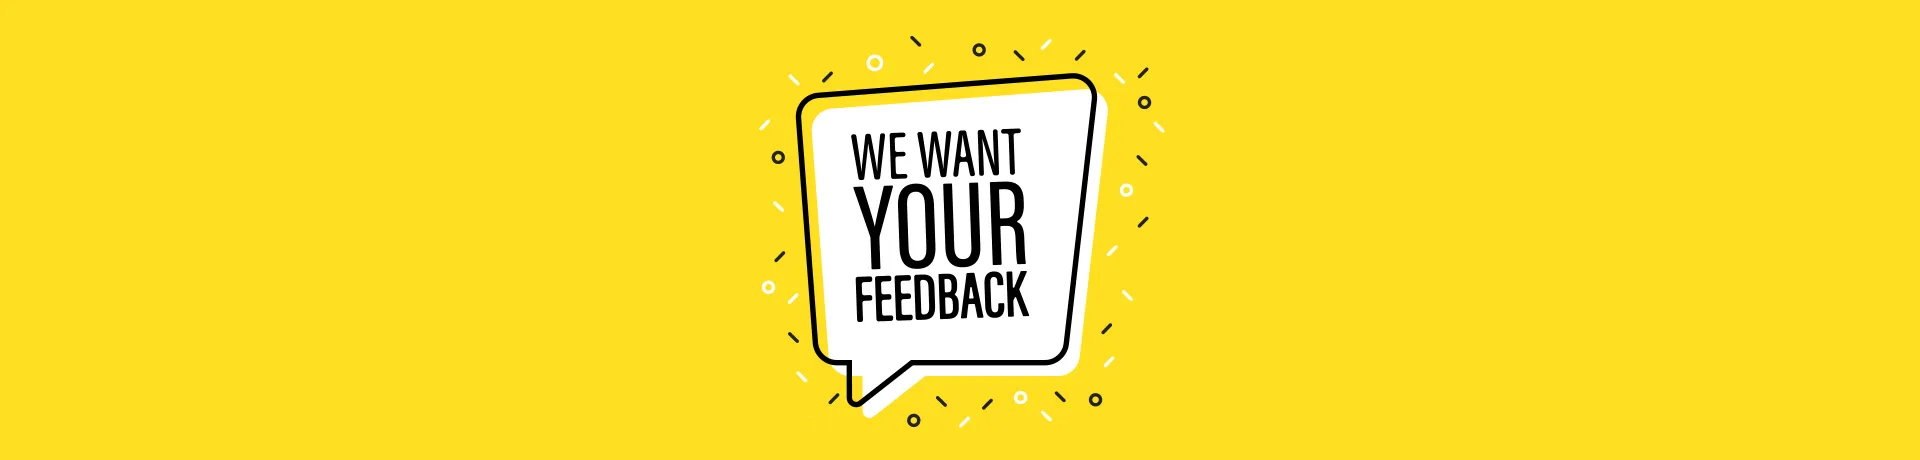 Have you transacted with us? We want your feedback!